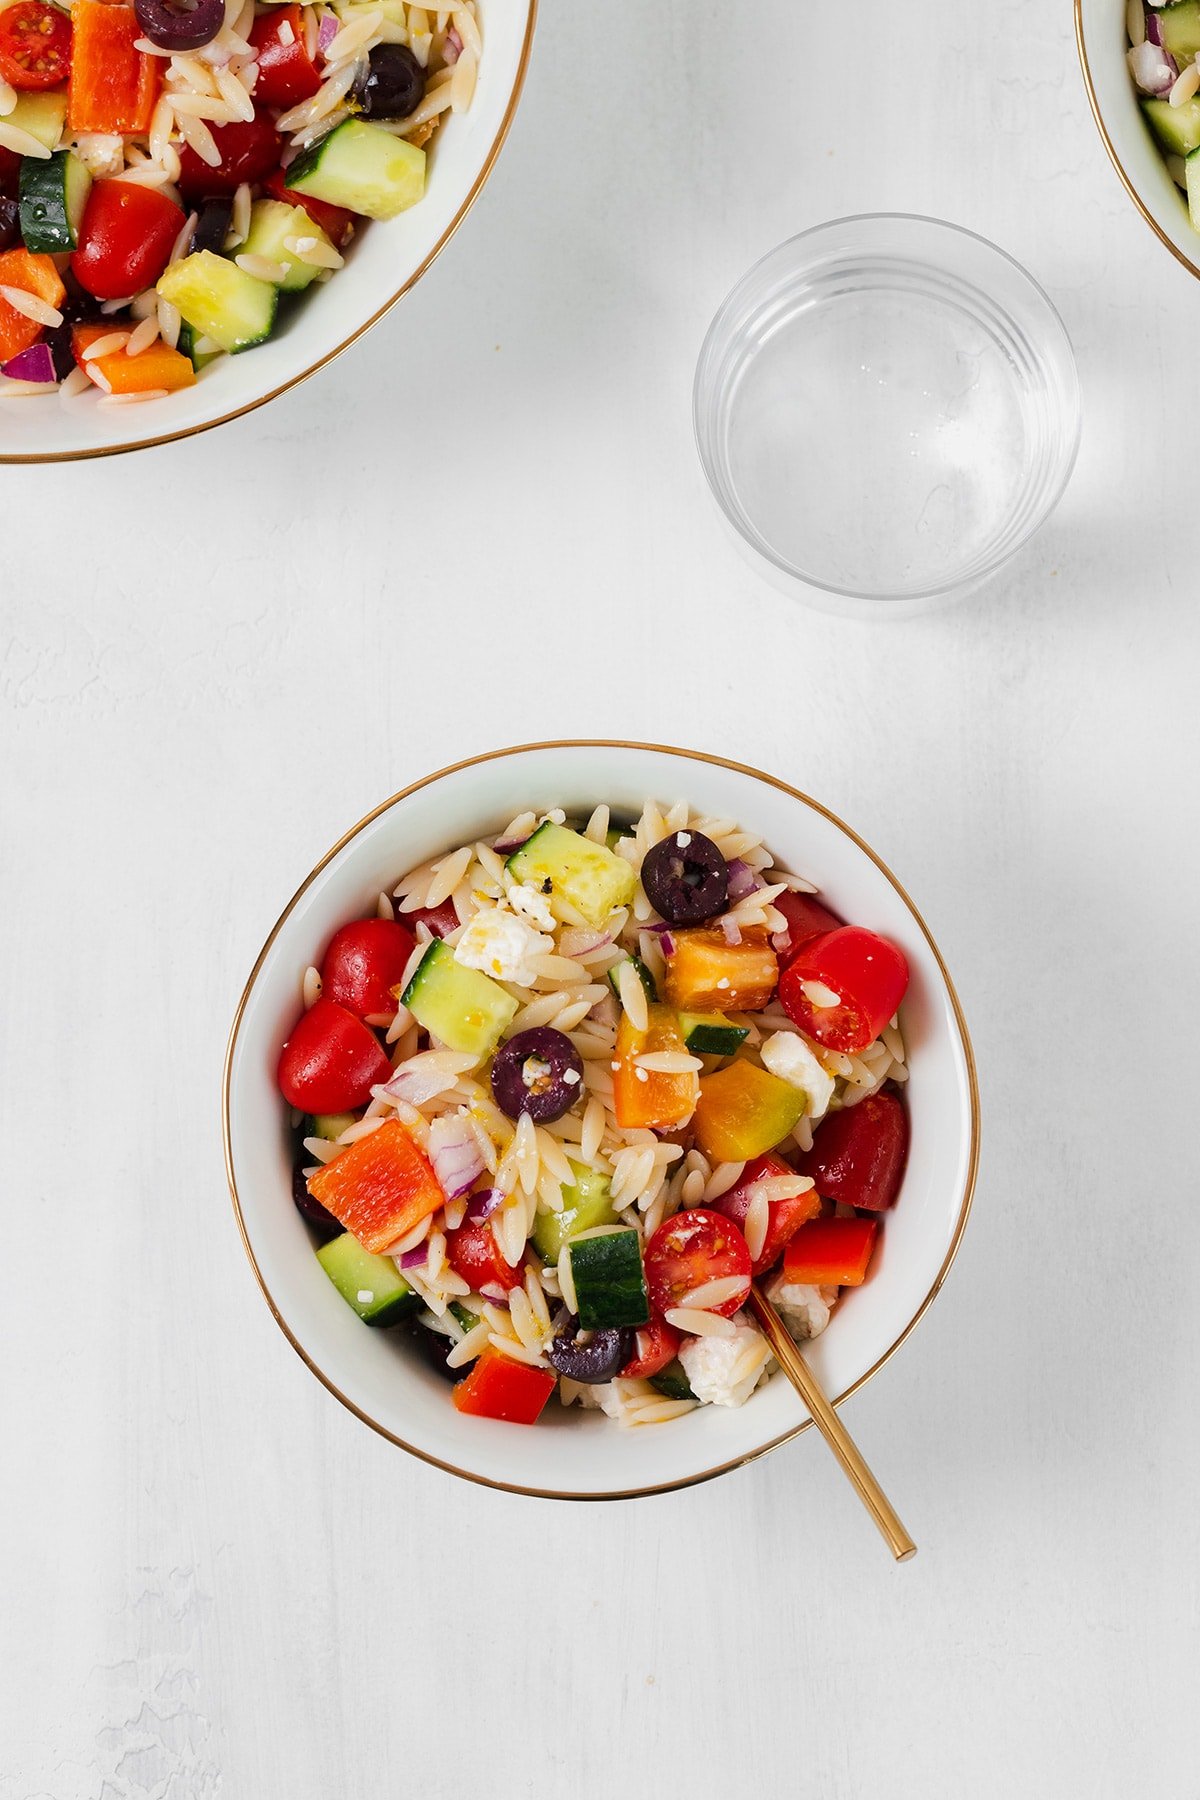 Orzo salad shown in a small white bowl with a gold rim. A small glass of water in the right side above it. Partially shown bigger bowl on the top left corner and a smaller bowl in the top right corner. Both bowls have the pasta salad in them.